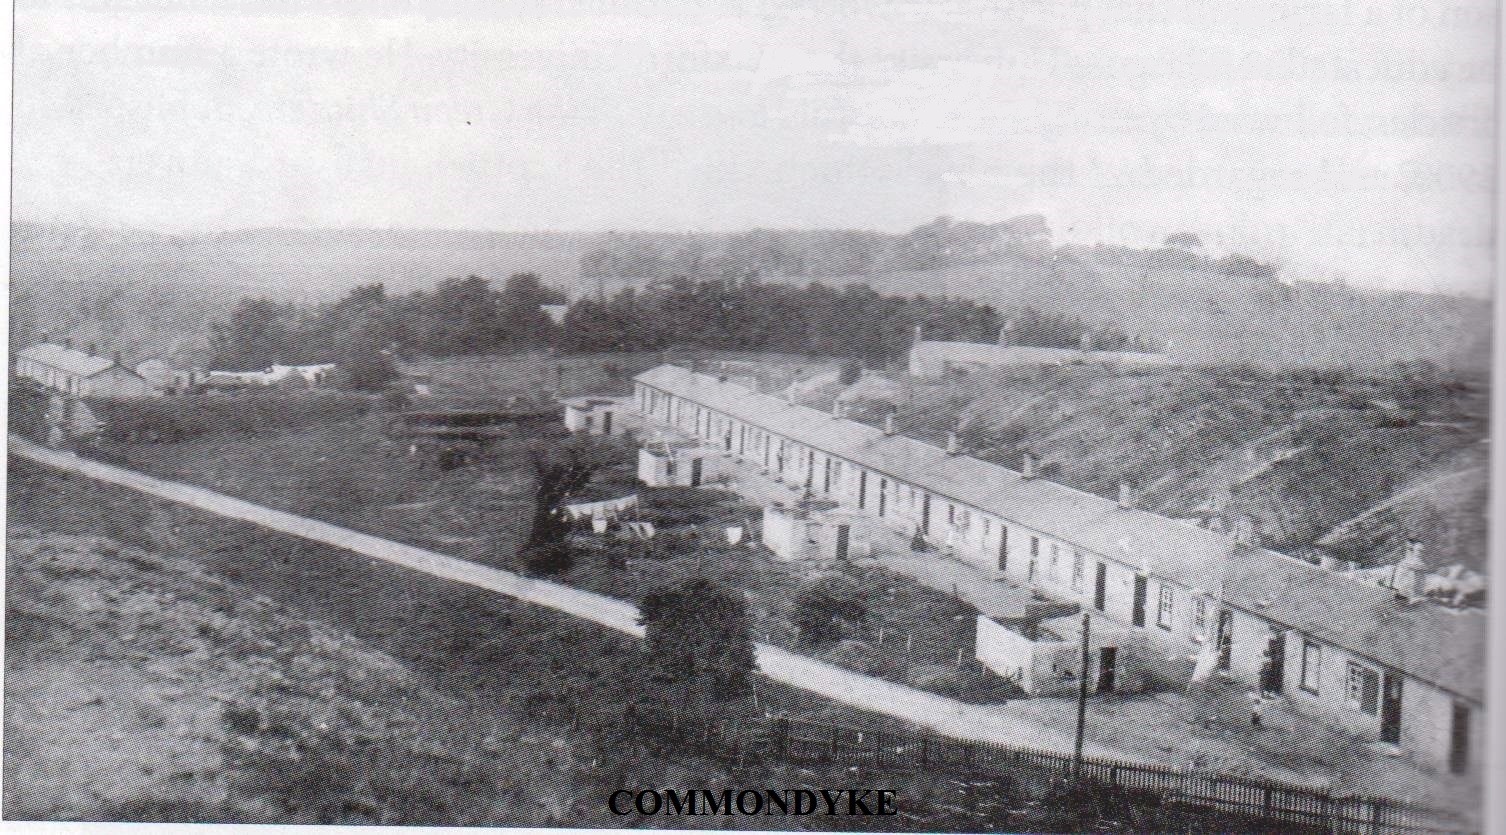 Village of Commondyke Ayrshire shown as a row of houses to the right with visible washhouses in gardens and surrounded by countryside and other rows in the distance